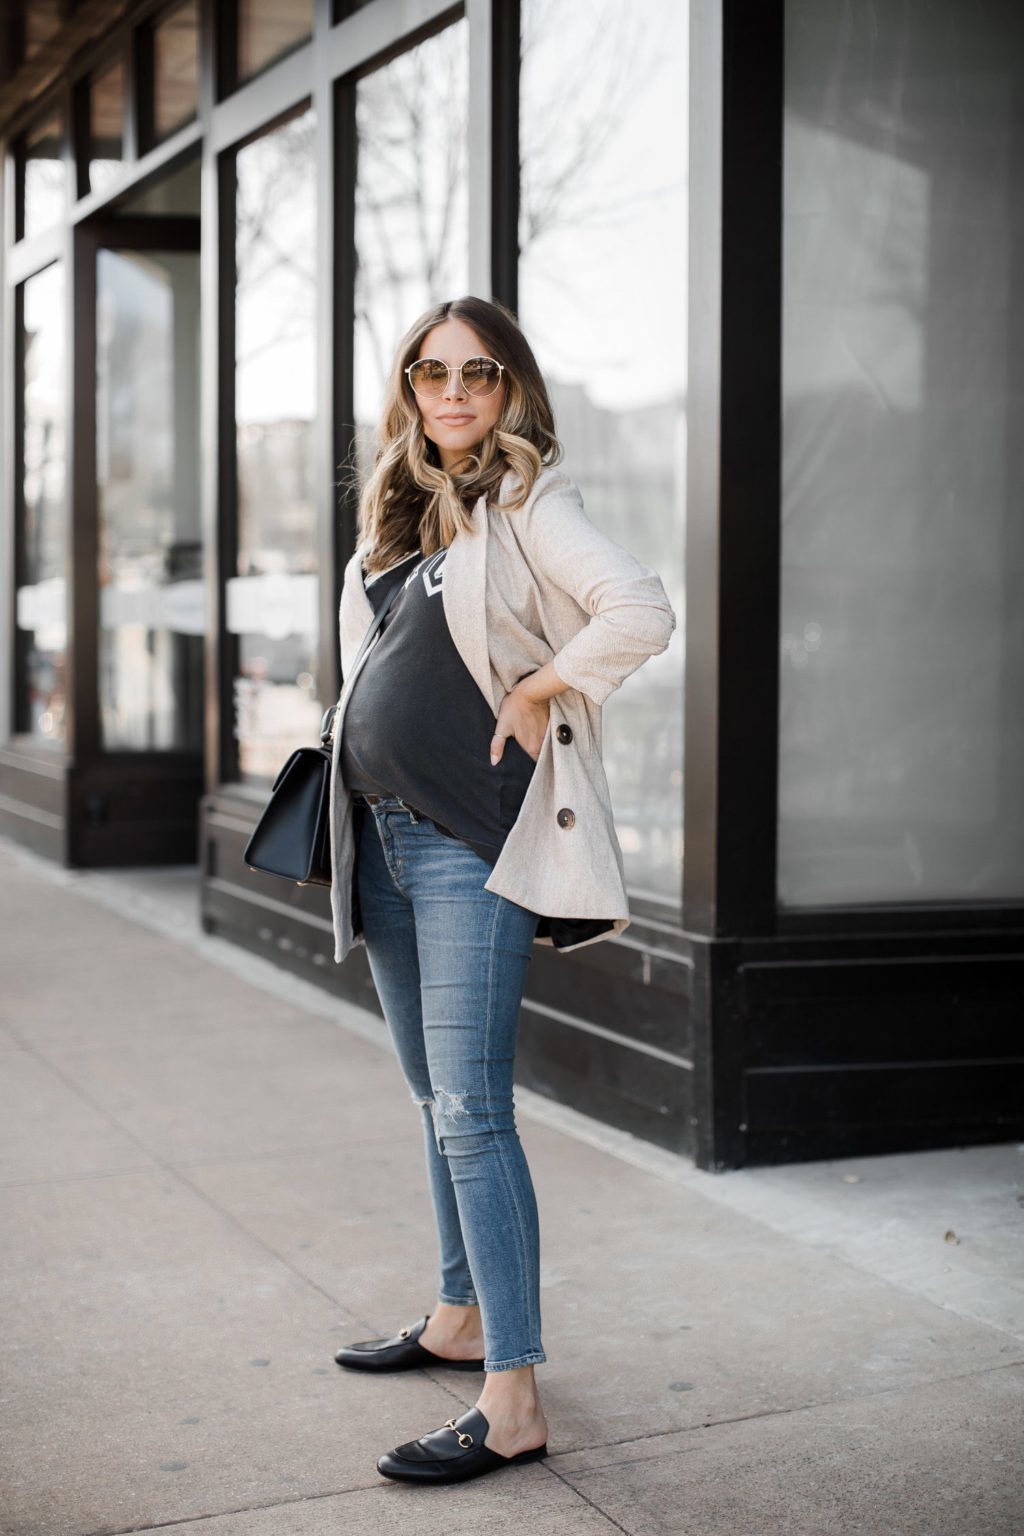 Where I'm Shopping for Maternity Jeans  The Teacher Diva: a Dallas Fashion  Blog featuring Beauty & Lifestyle